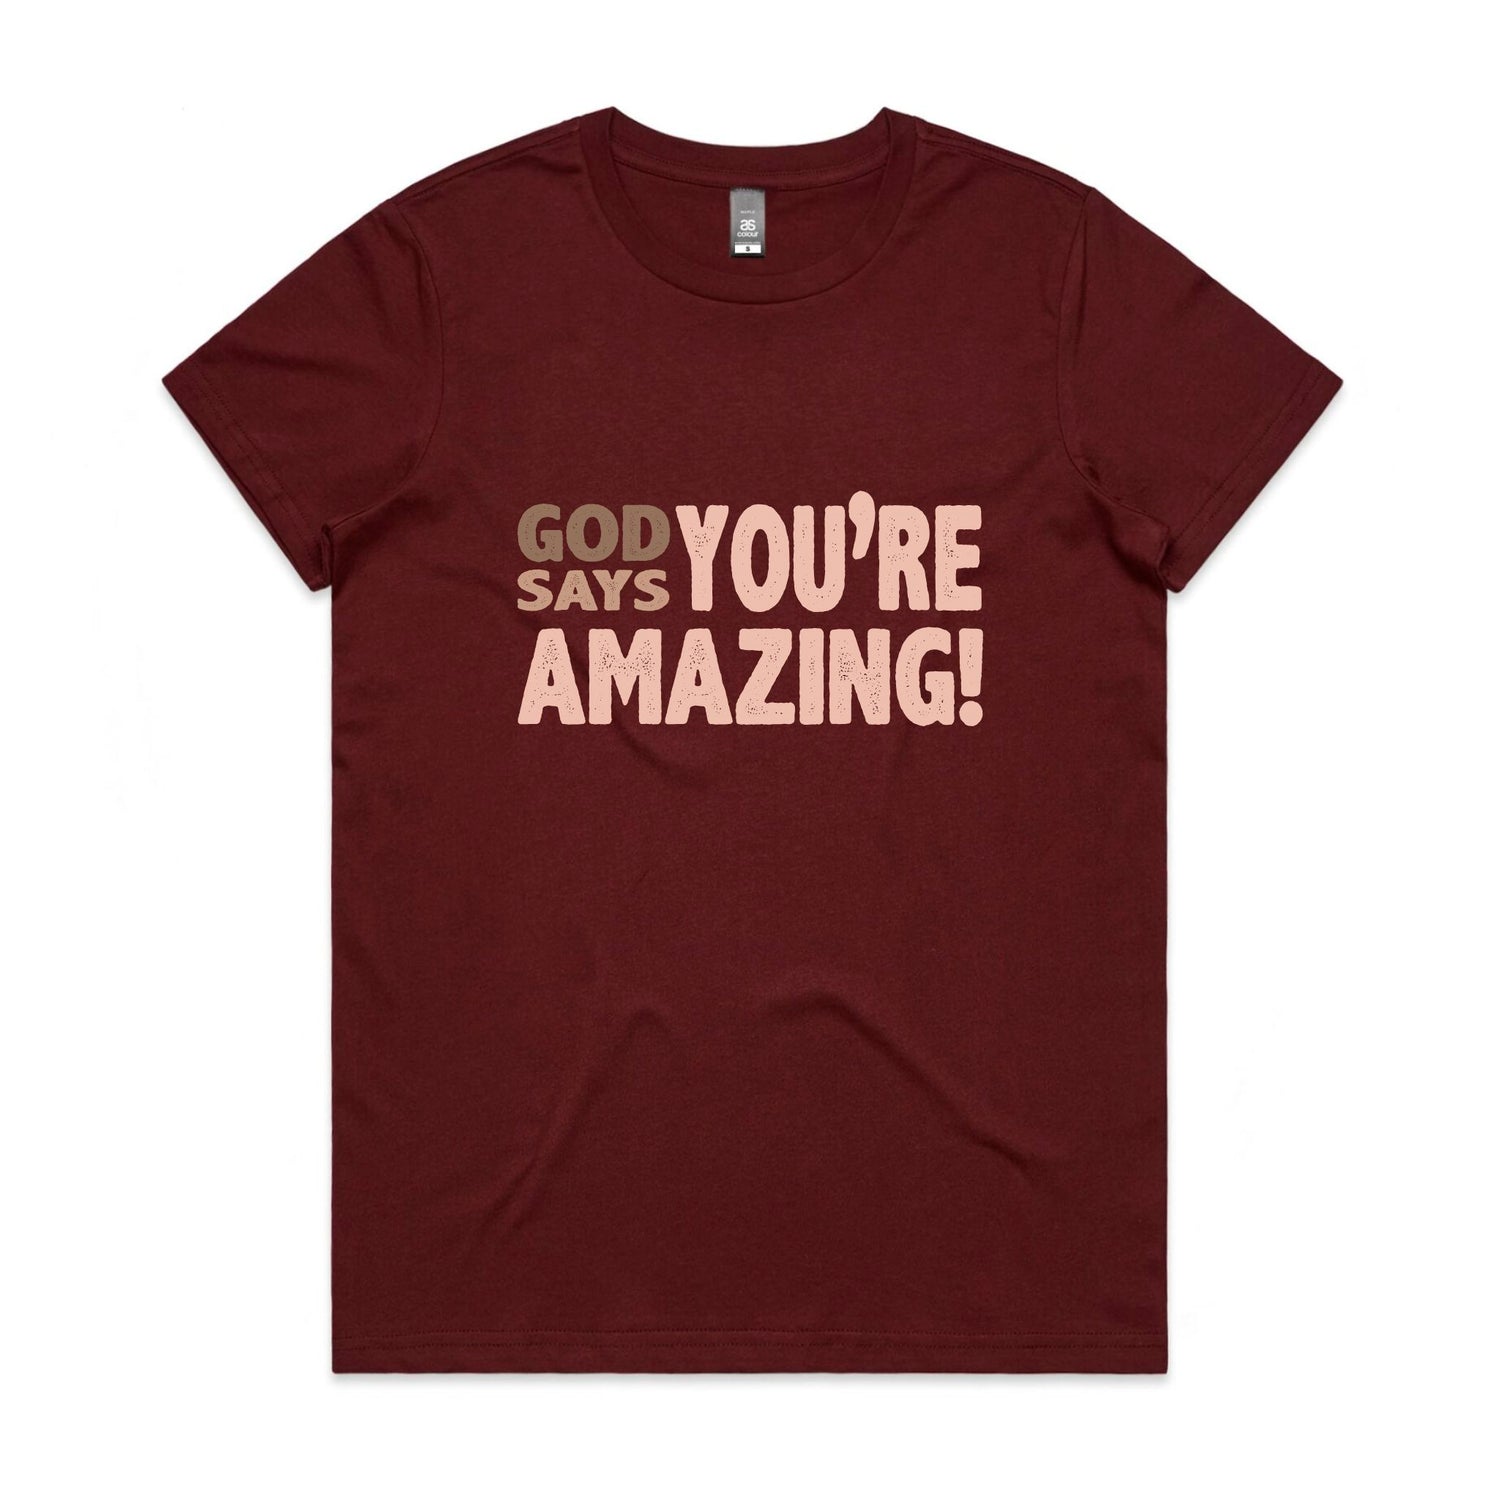 God says you're amazing Women's maple tee from God Speaks Back